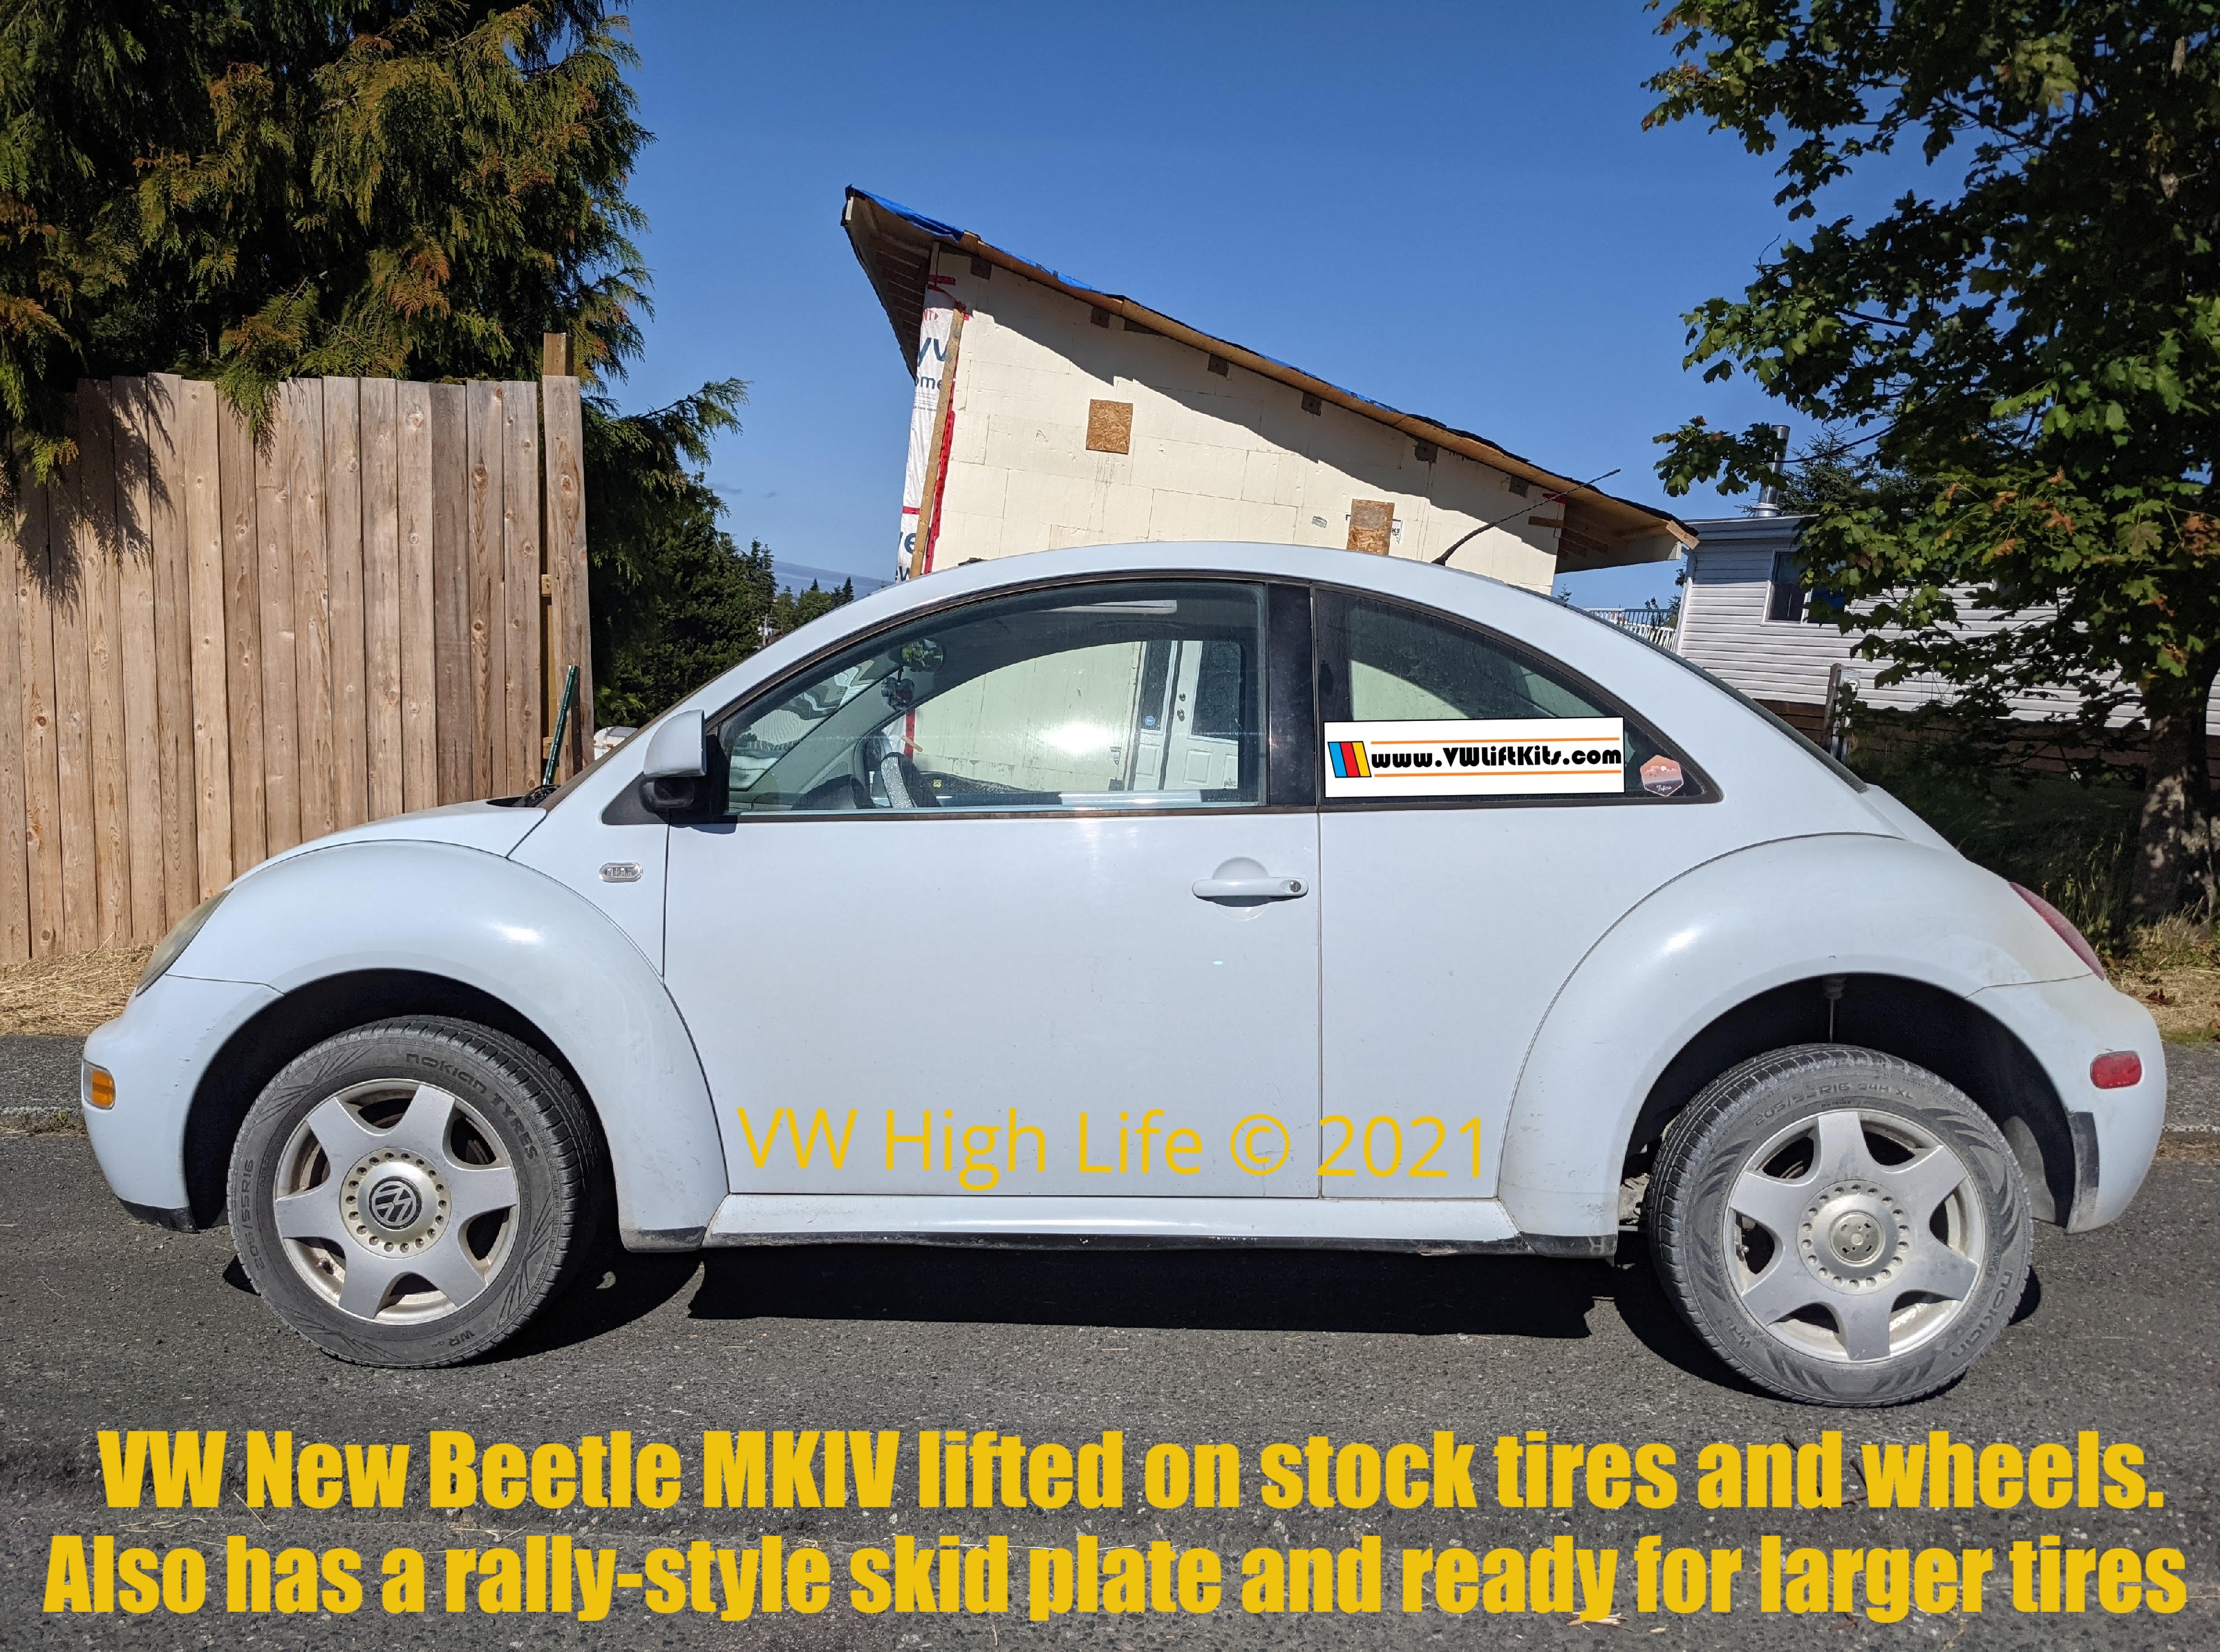 Lance raised his Beetle MKIV properly and also added our rally-style skid plate.